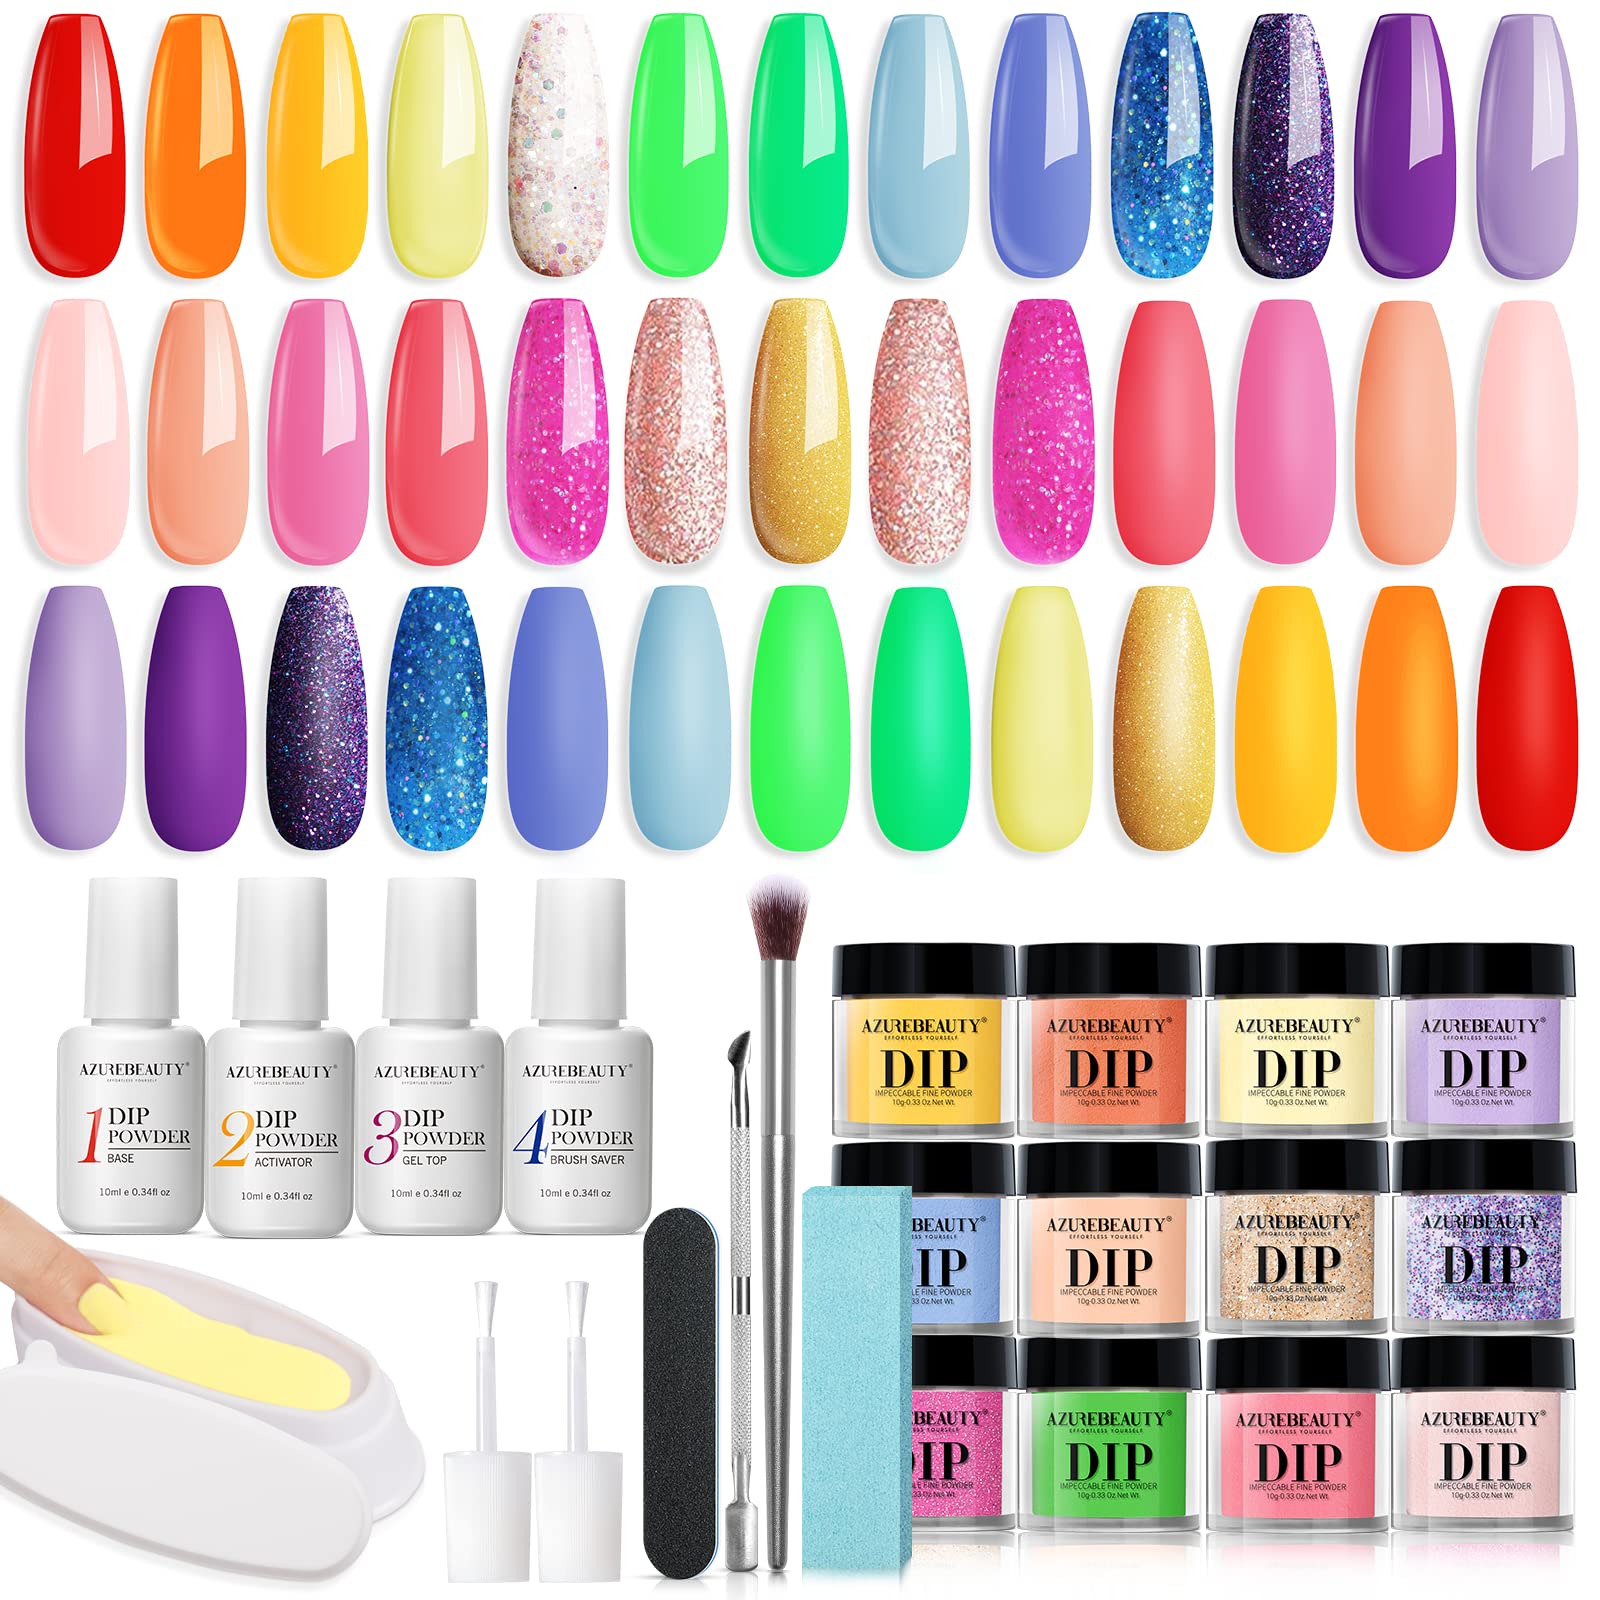 AZUREBEAUTY 31 Pcs Dip Powder Nail Kit Starter, Spring Summer 20 Colors Glitter Neon Pink Blue Green Dipping Powder Liquid Set with Top/Base Coat Activator for French Nail Art Manicure DIY Salon Gift